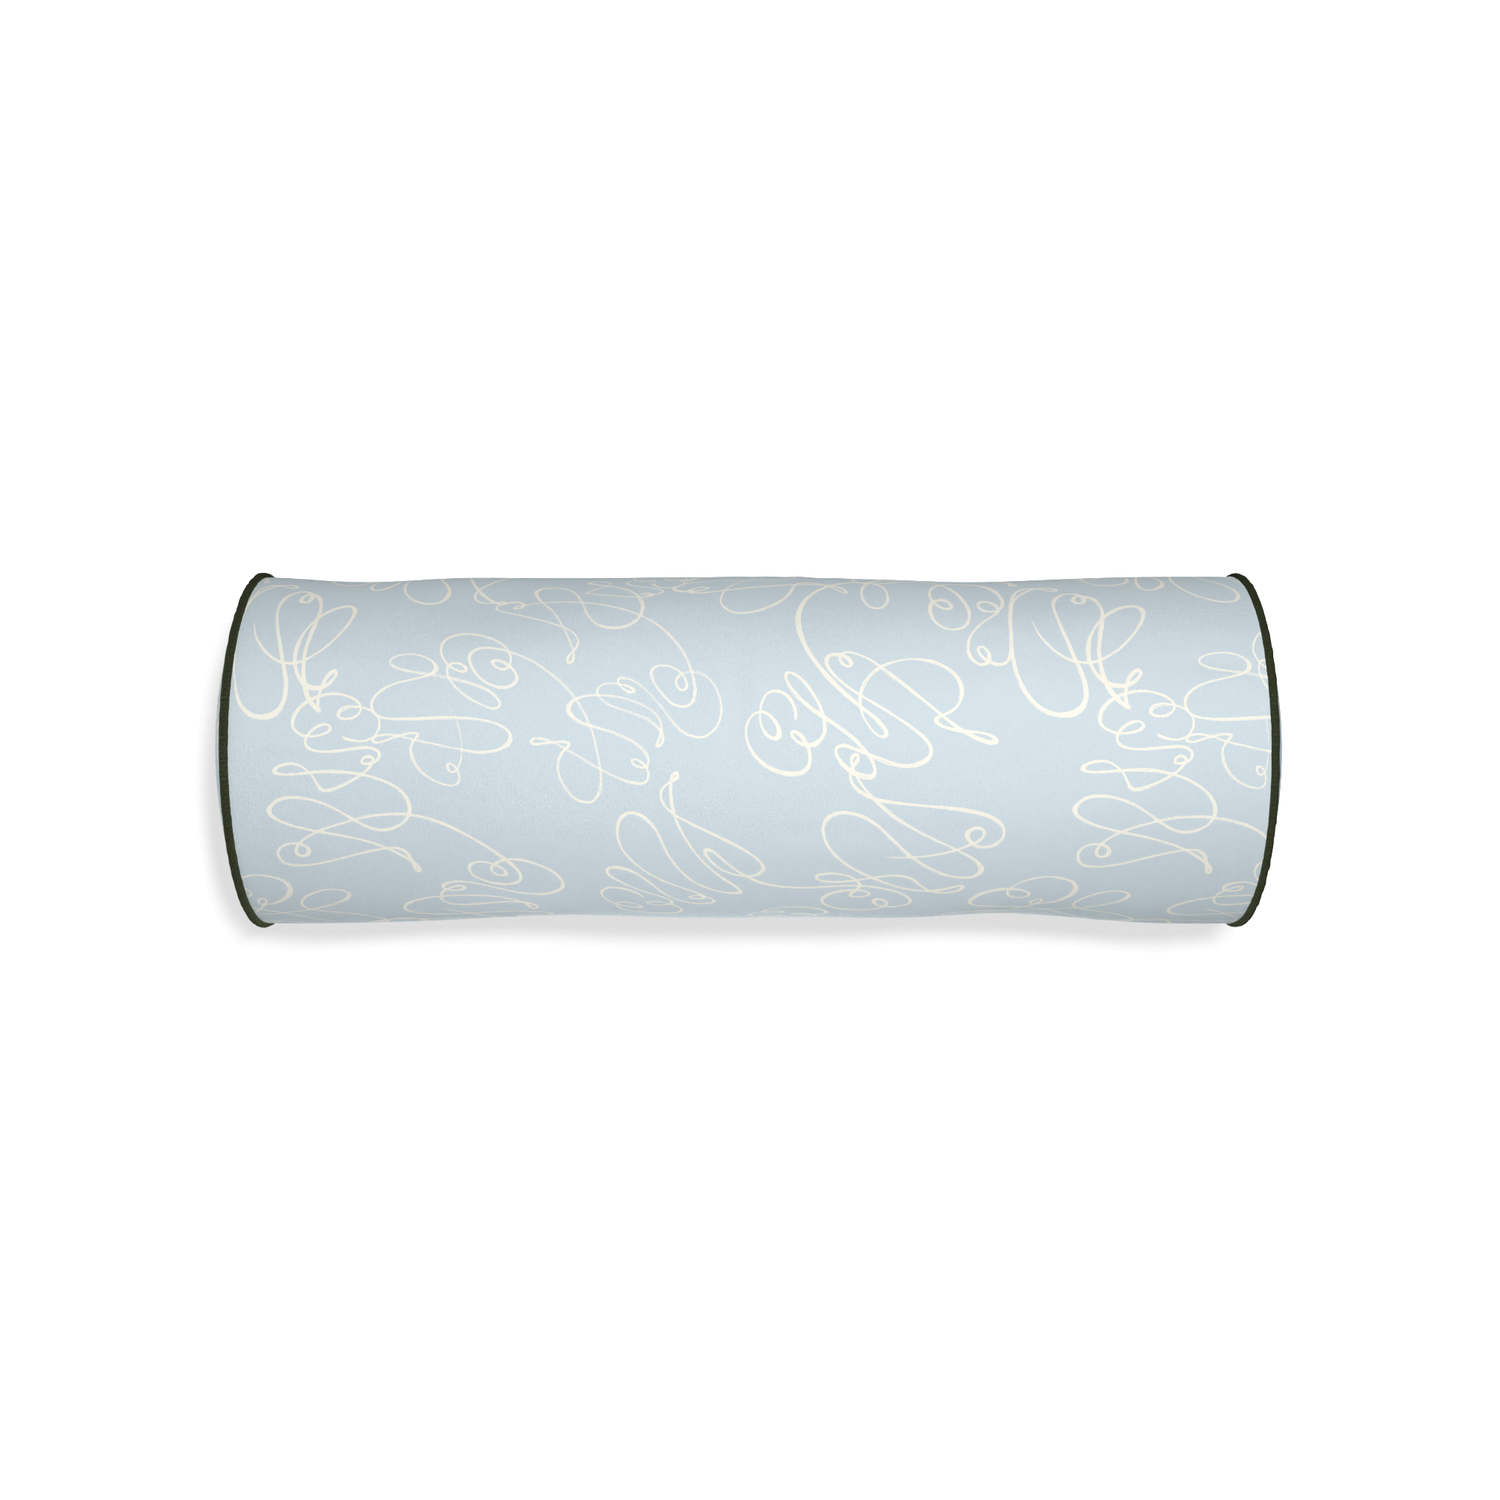 Bolster mirabella custom powder blue abstractpillow with f piping on white background